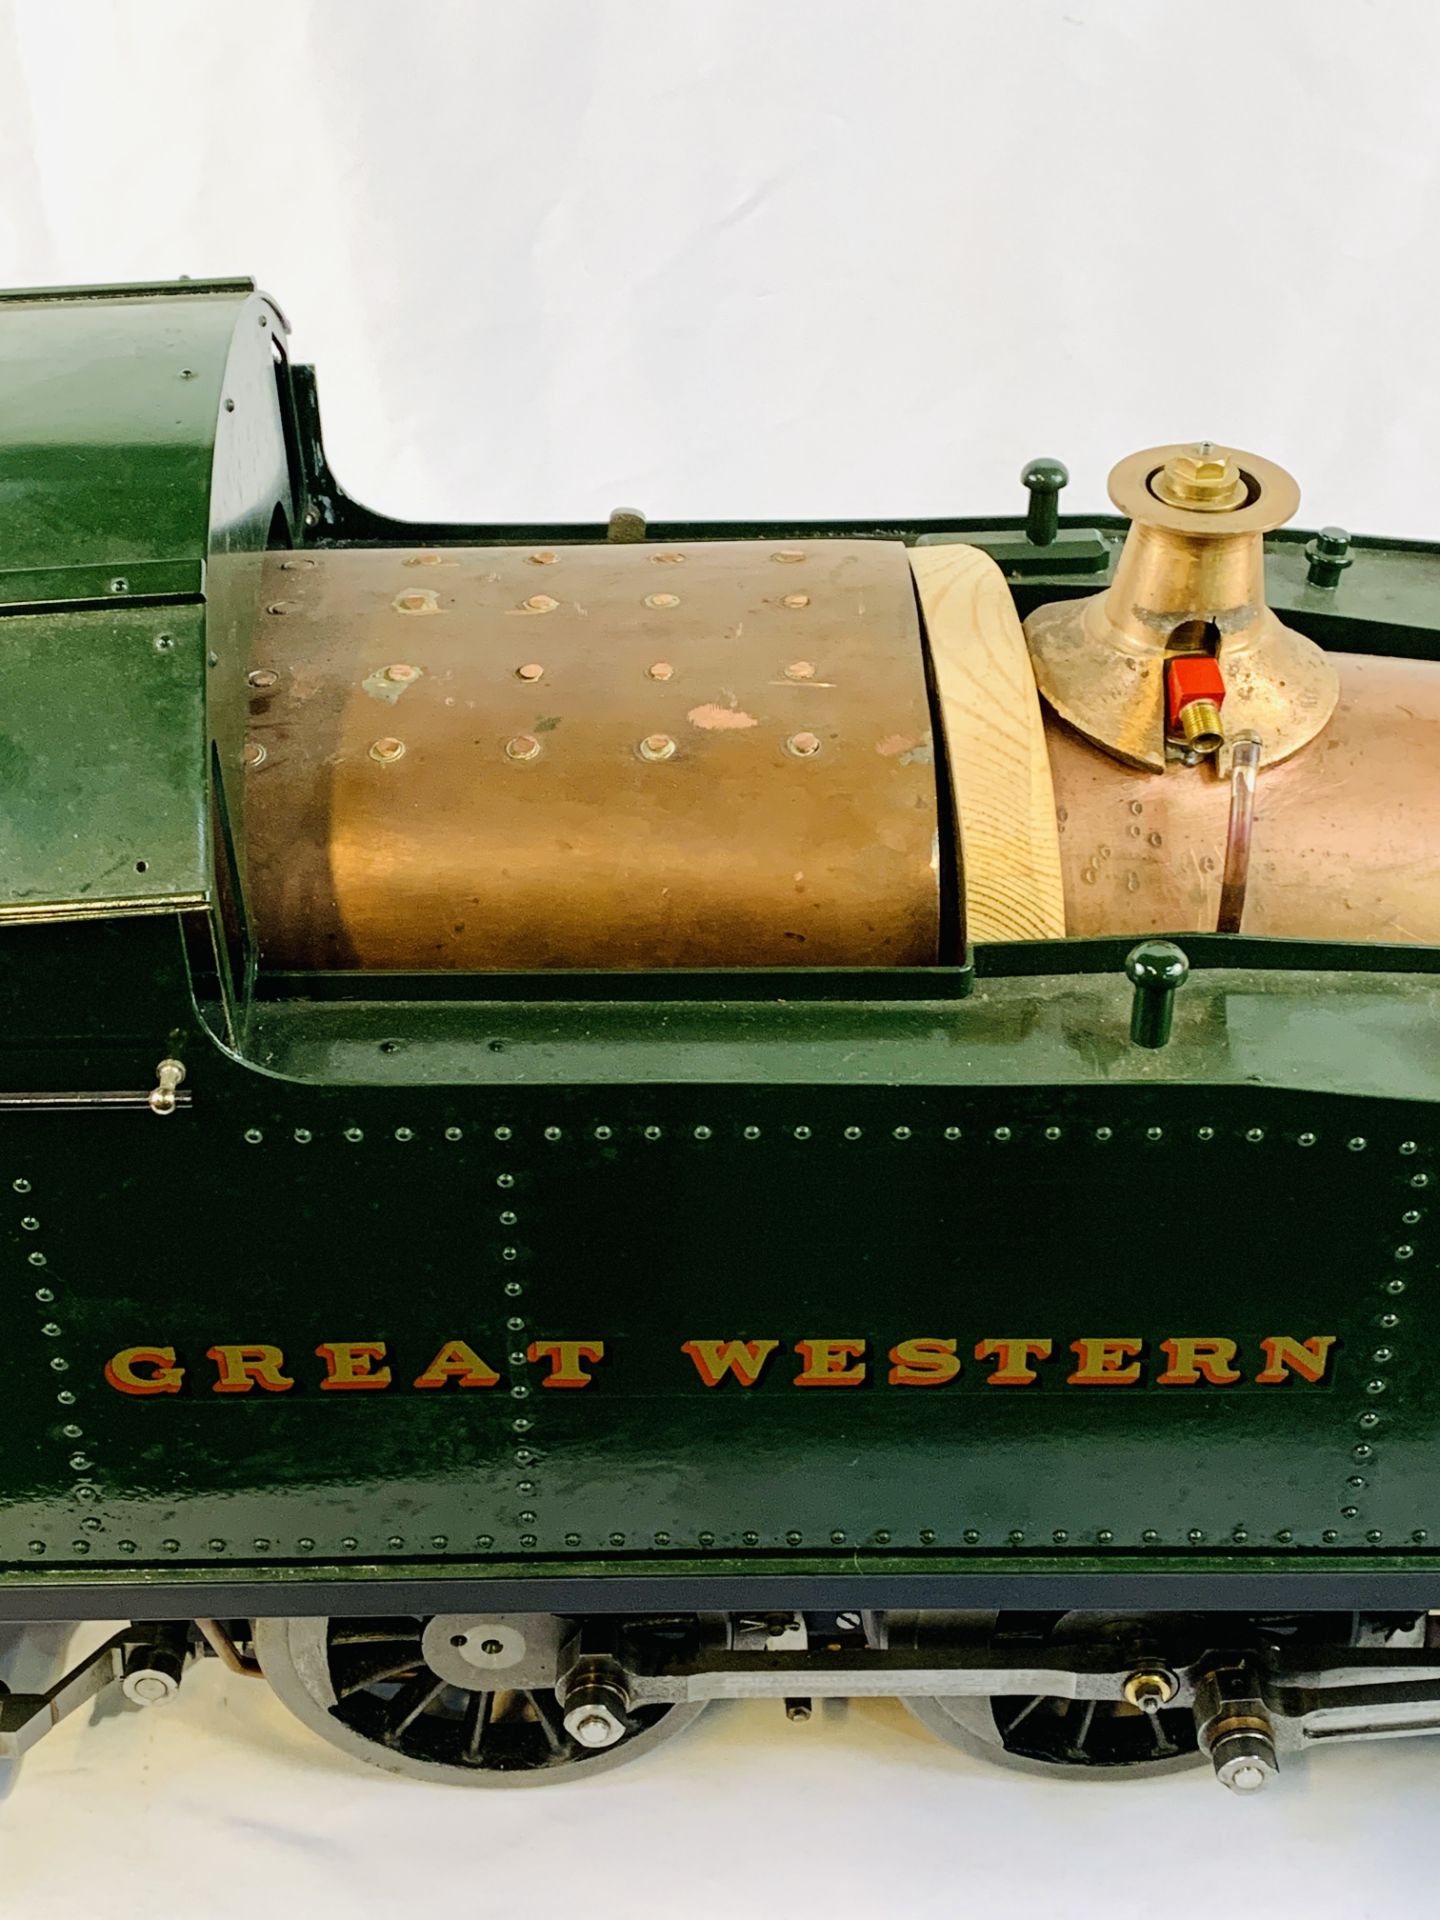 Great Western 2-6-2 5" gauge tank locomotive, together with a quantity of parts and plans - Image 6 of 13